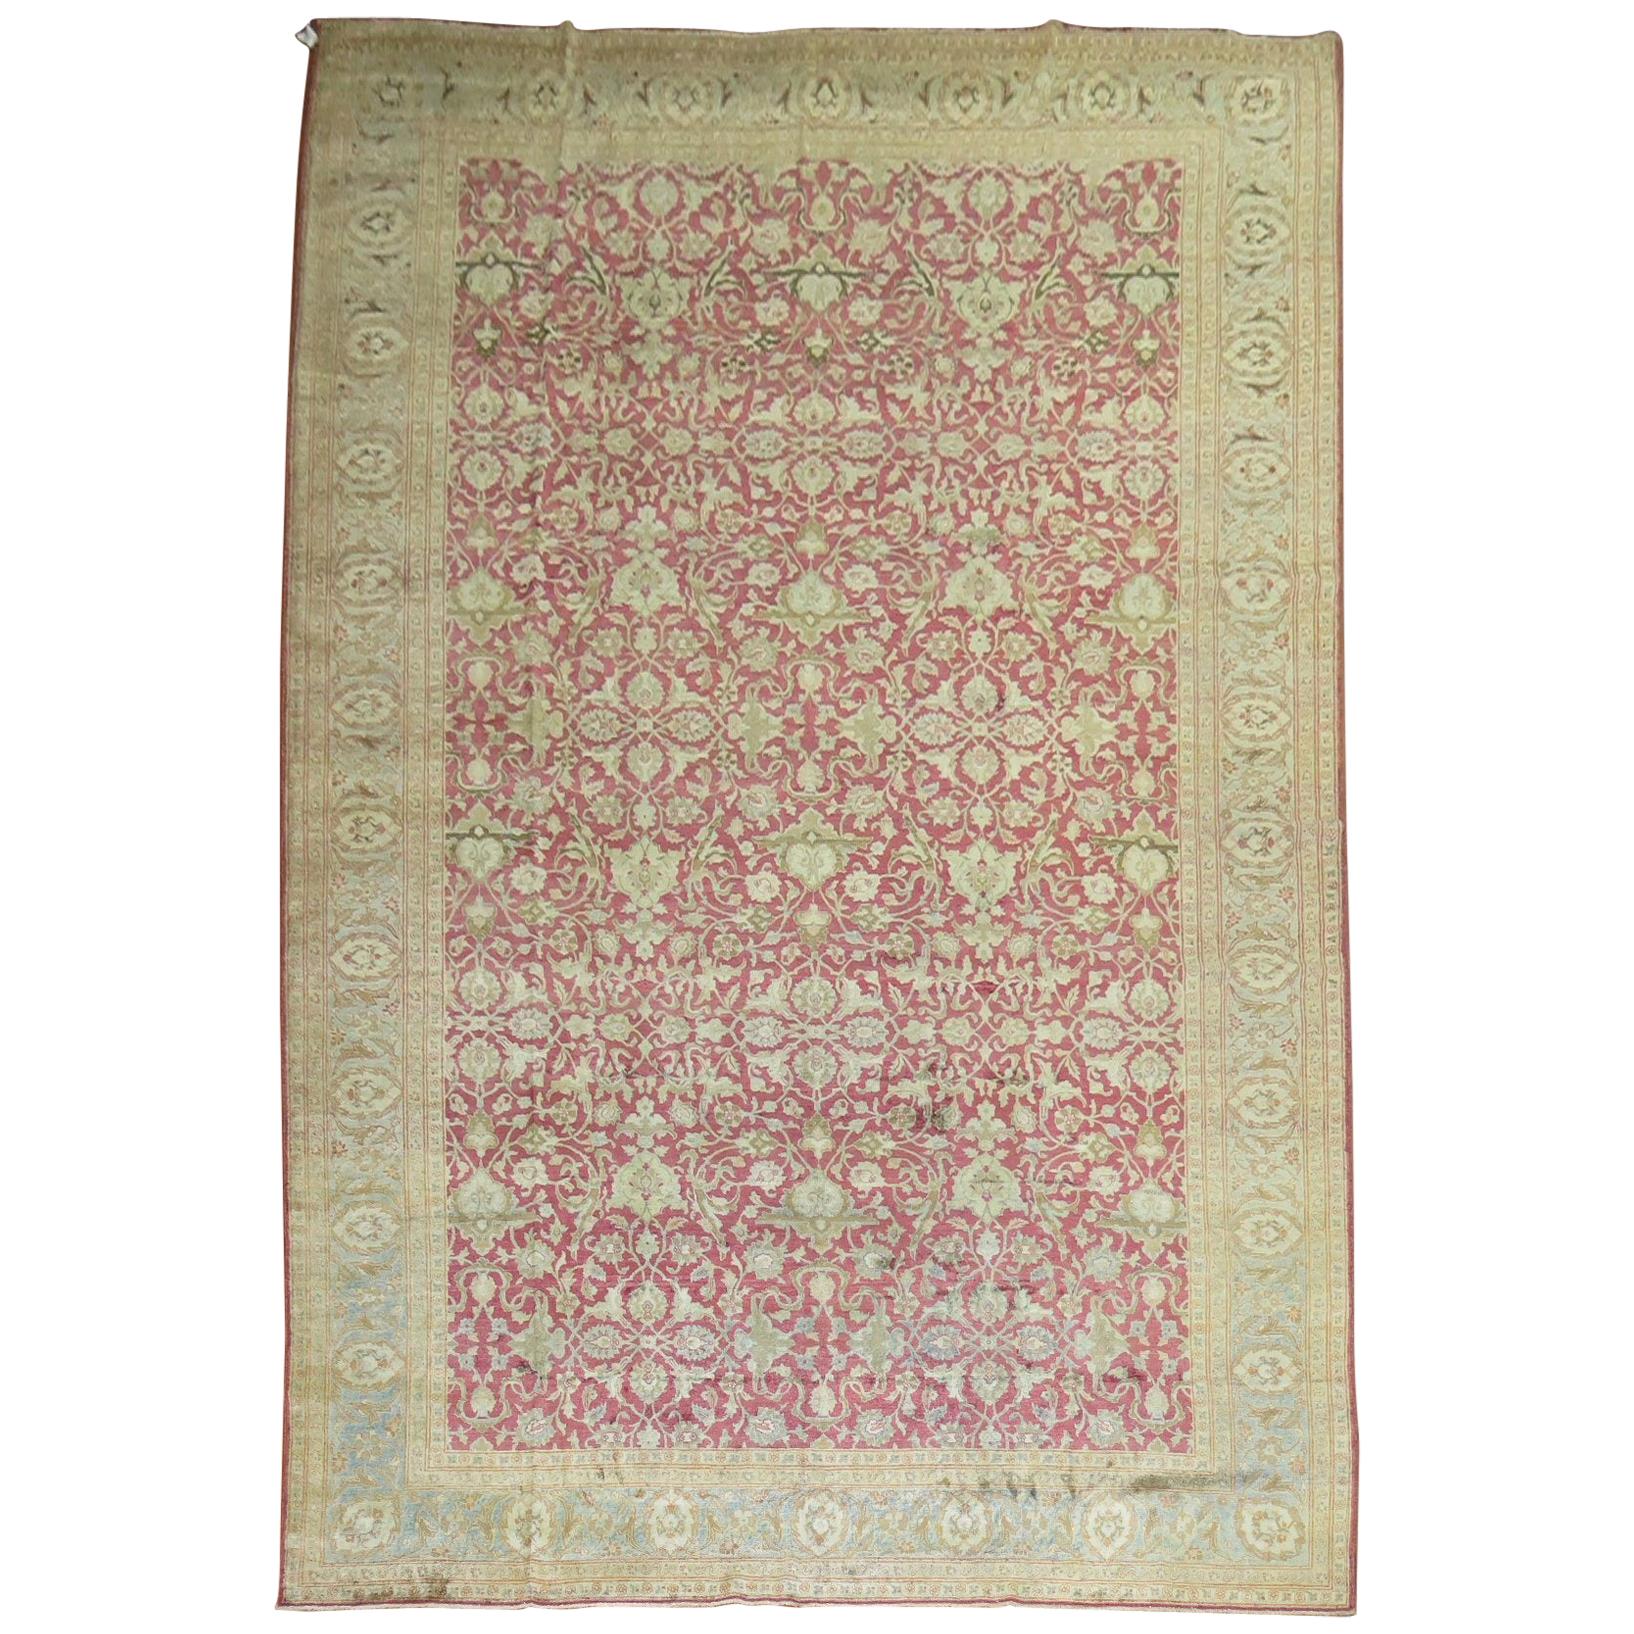 Raspberry Icy Blue Oversize Persian Tabriz Rug, Early 20th Century For Sale